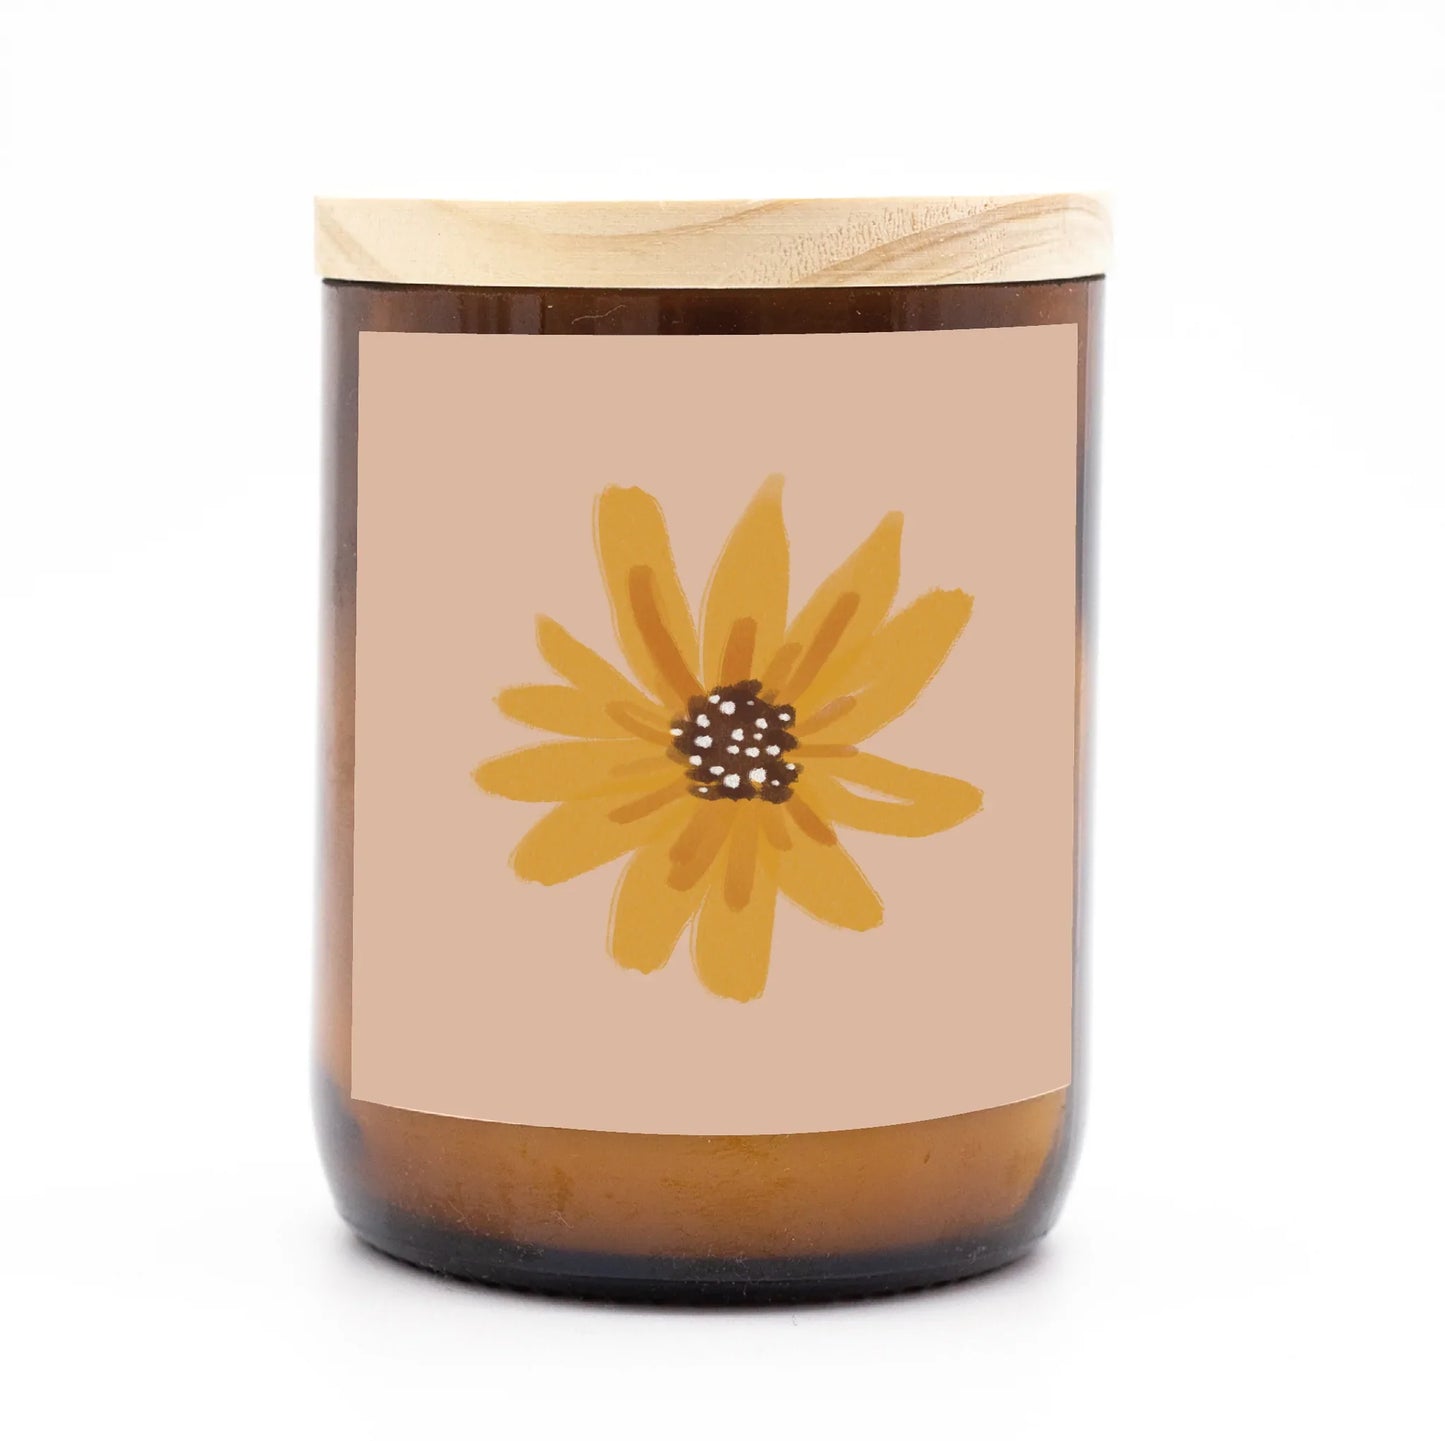 The Commonfolk Earth Collection Candle